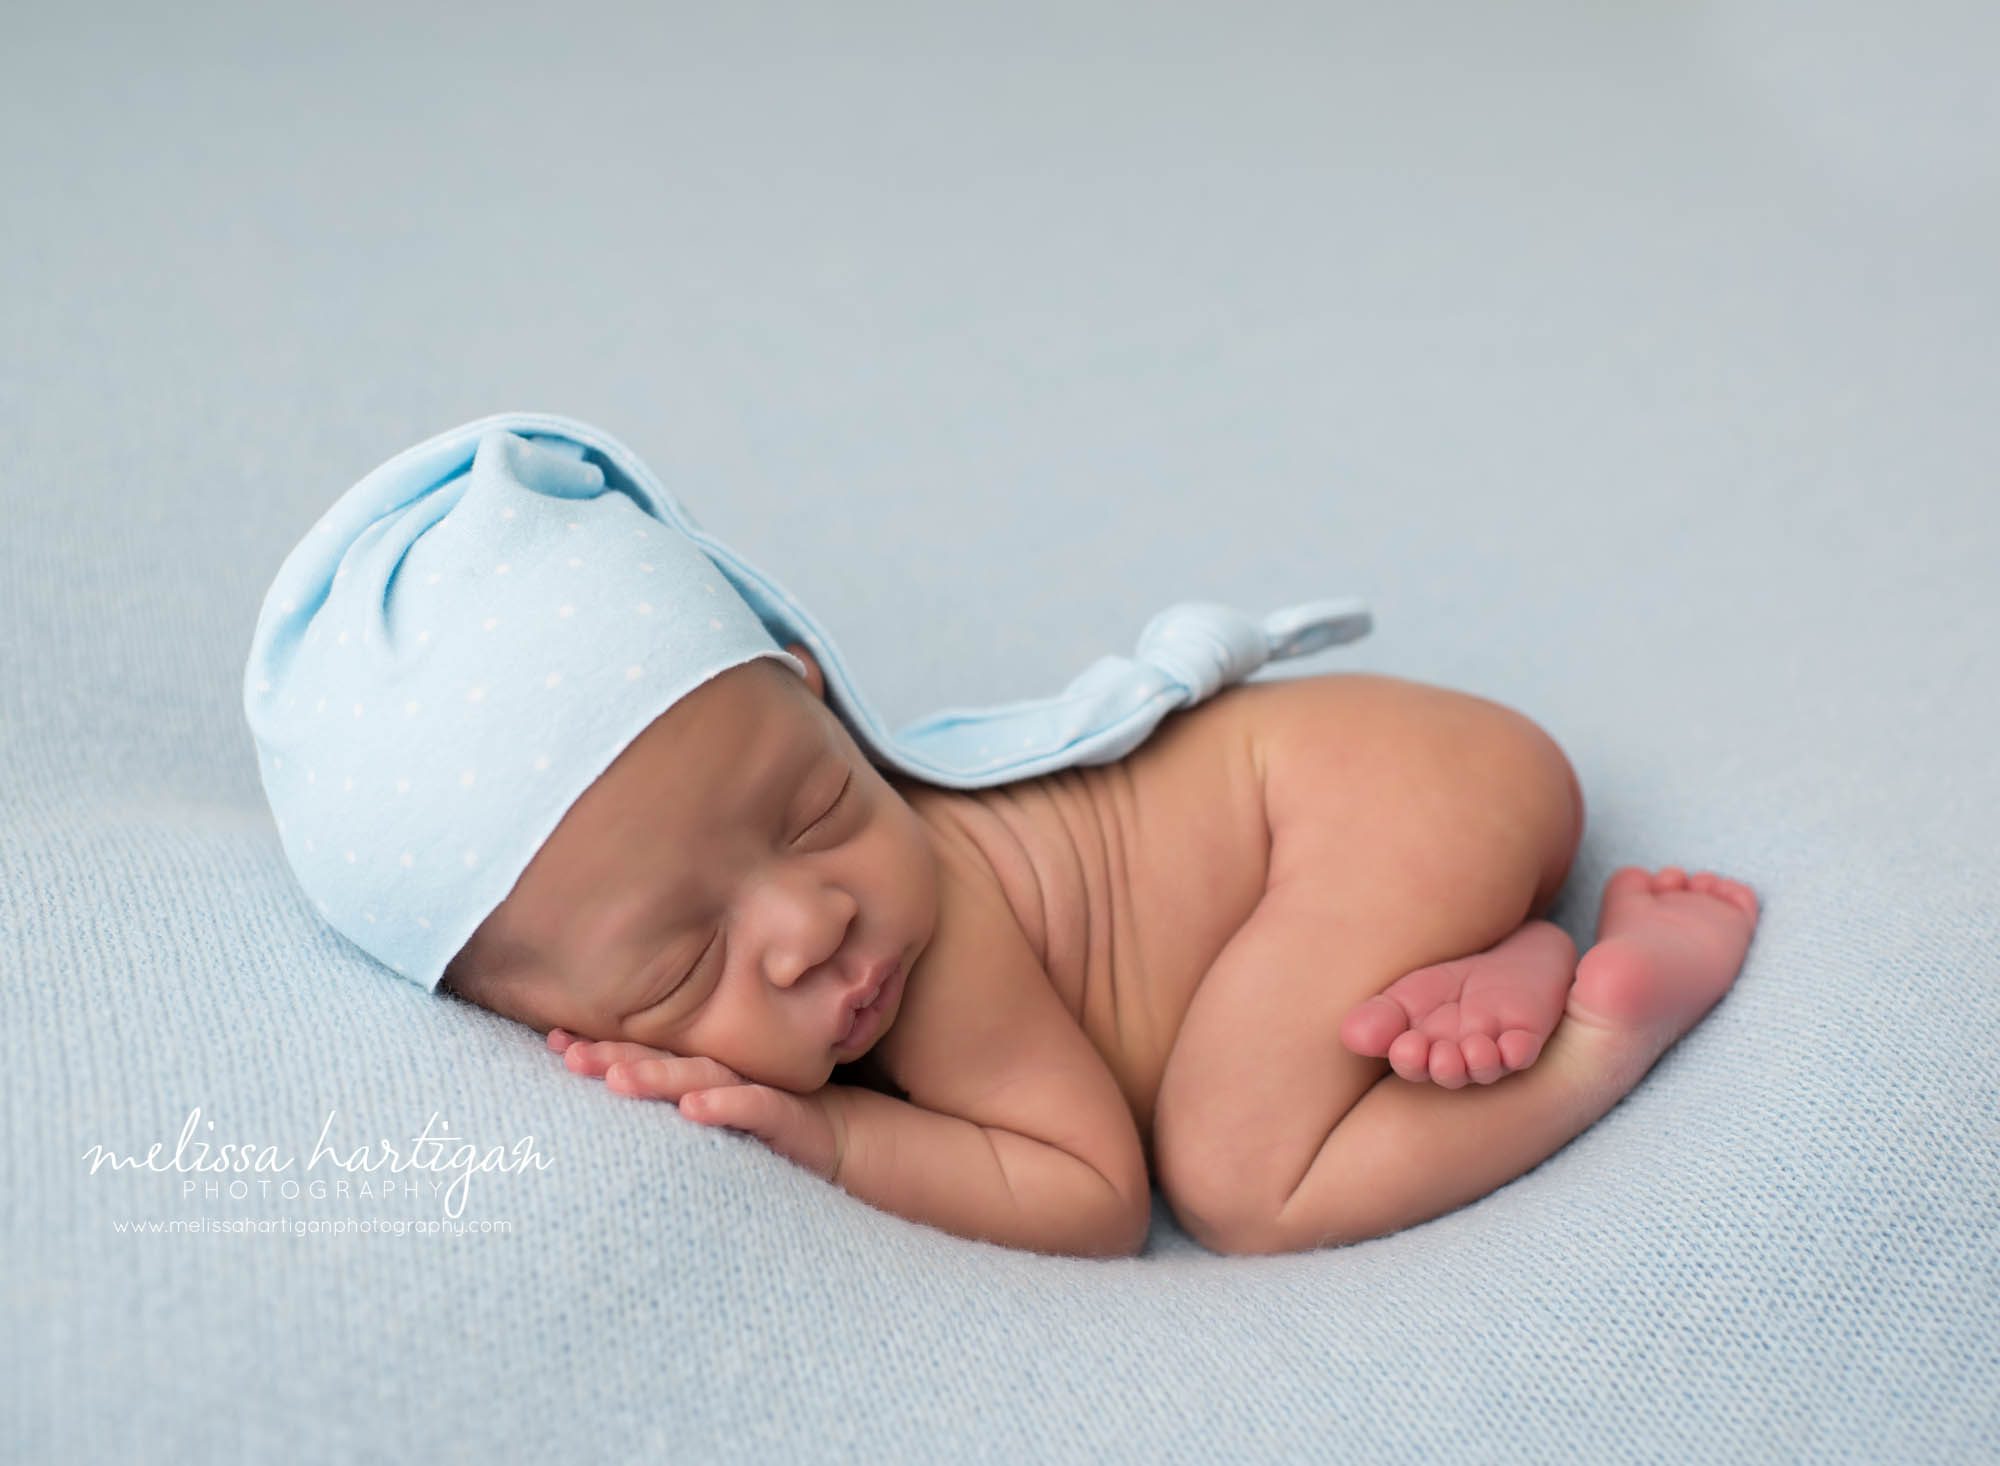 newborn baby boy posed on blue backdrop with light blue sleepy cap with white polka dots